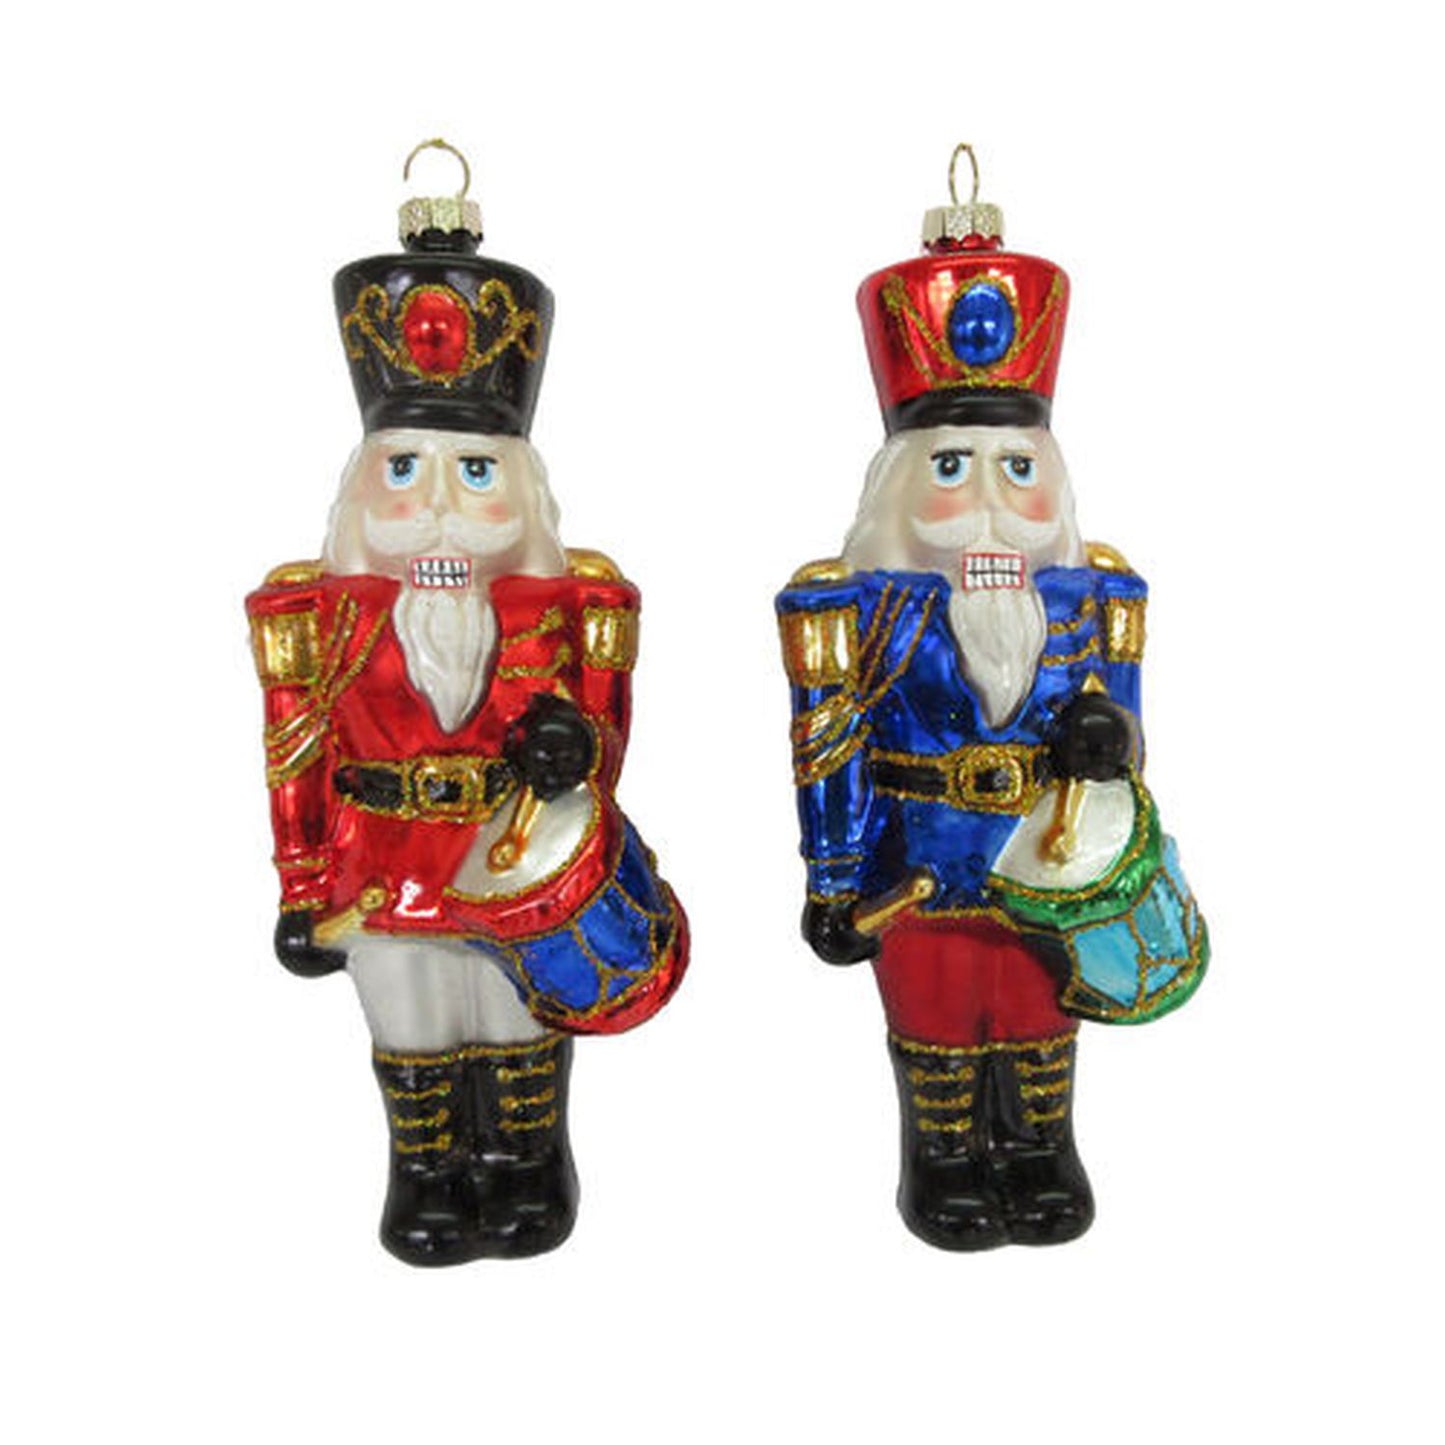 Christmas Carousel Set Of 2 Assortment Nutcracker With Drum Ornaments